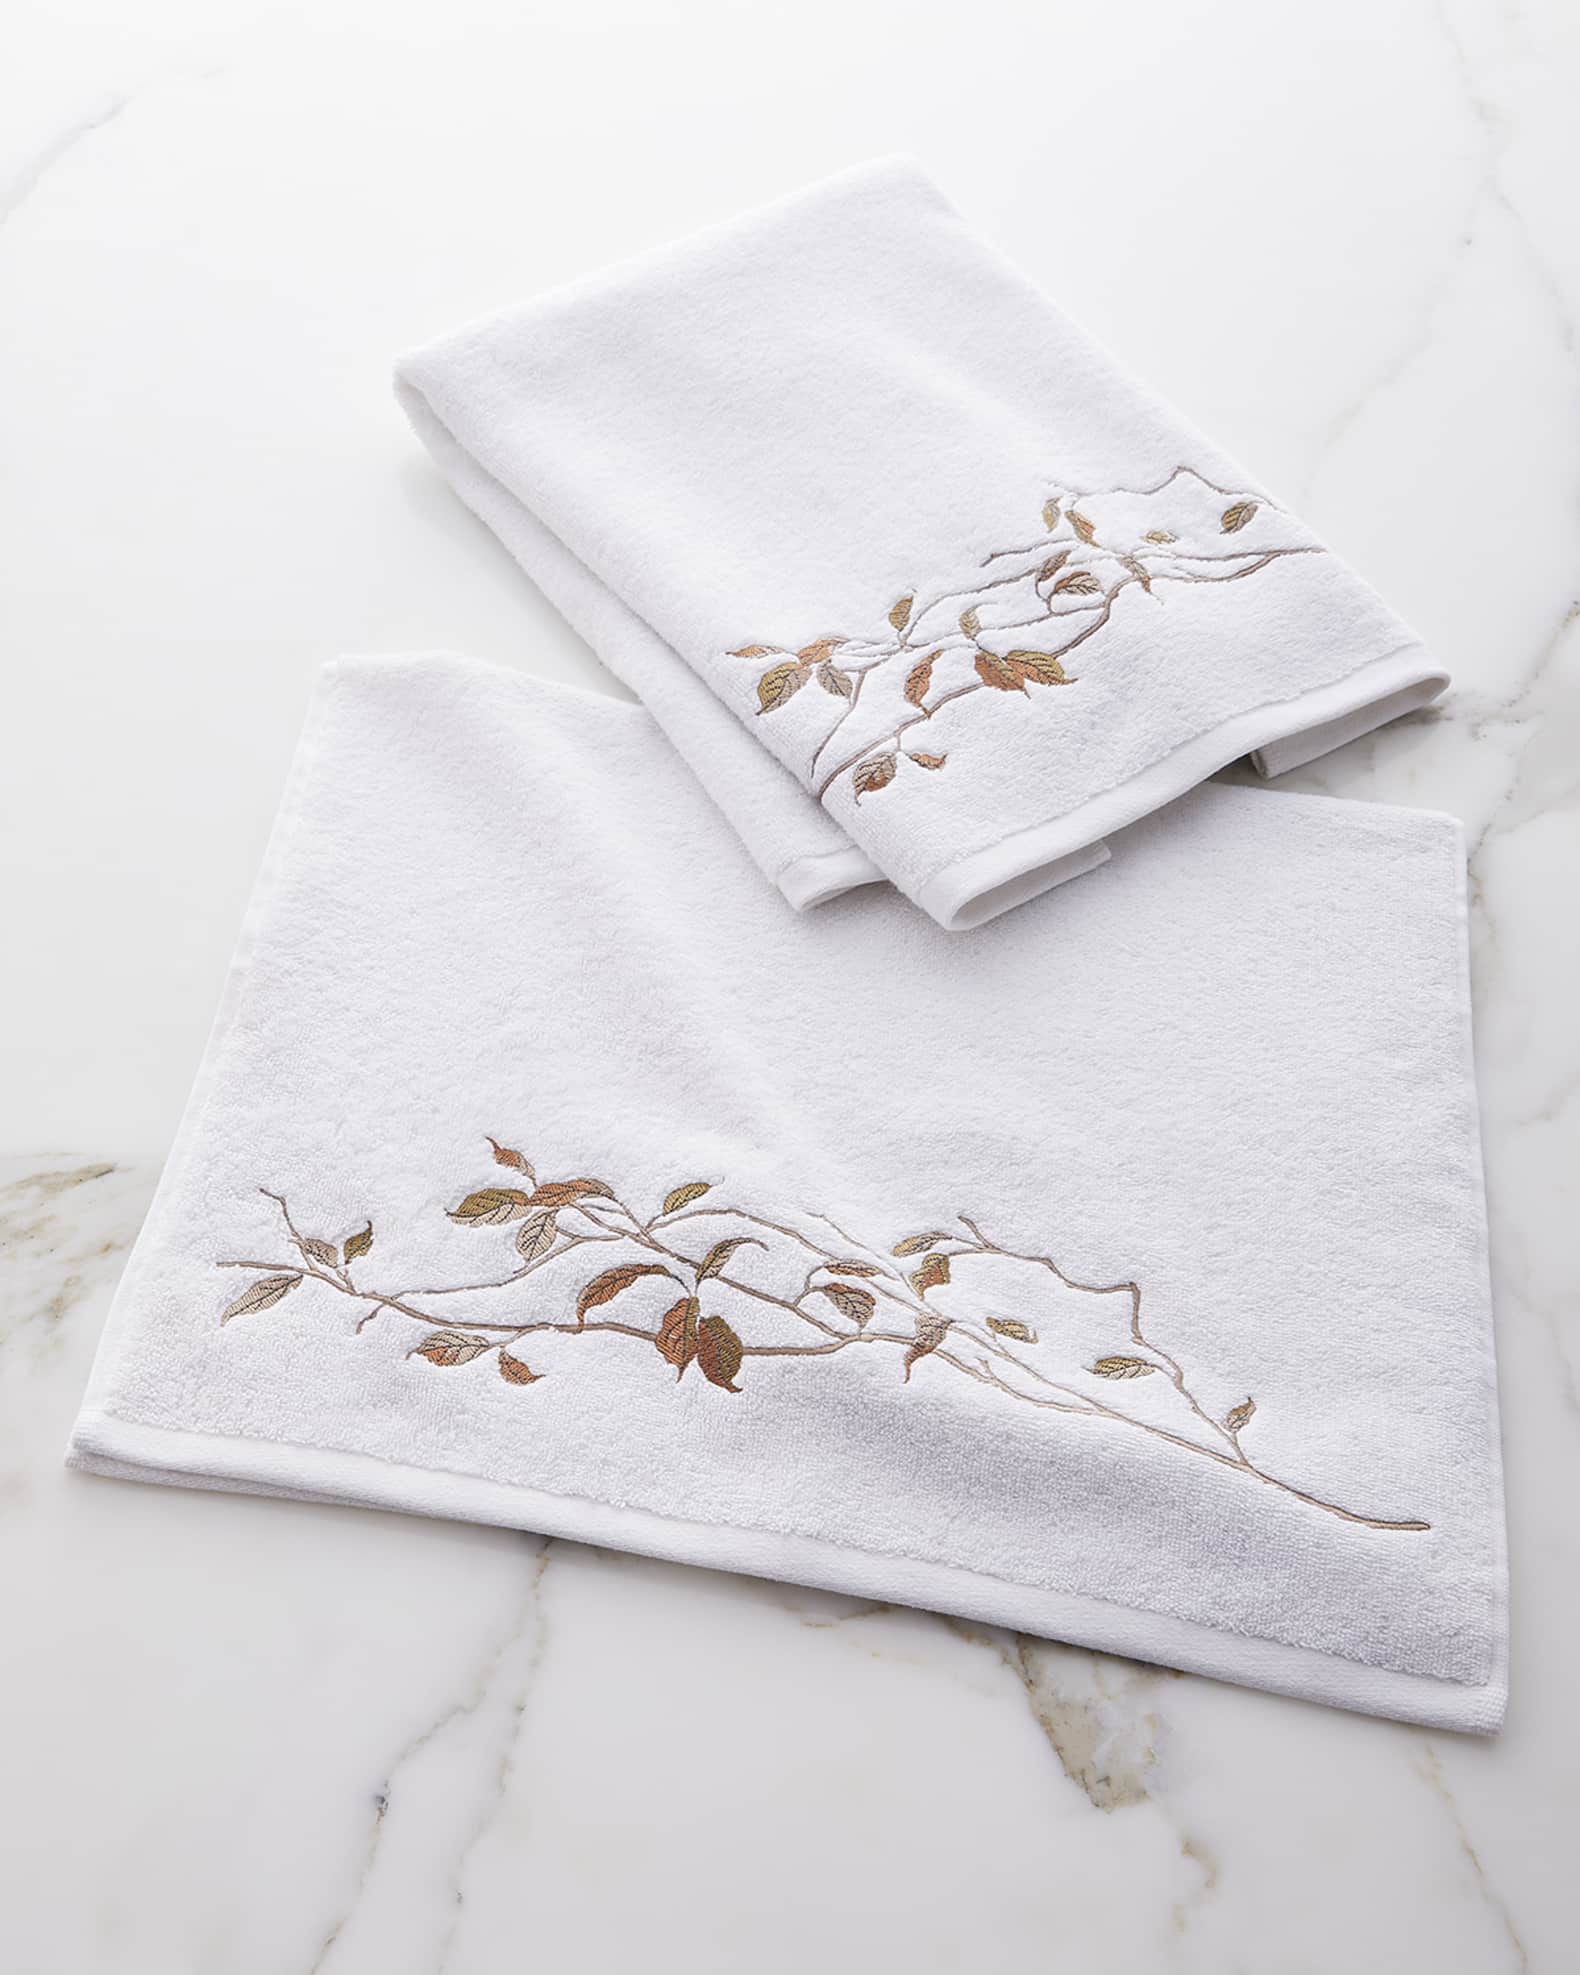 Buy The Floral Collection - Embroidered Towel Sets (Hand Towels